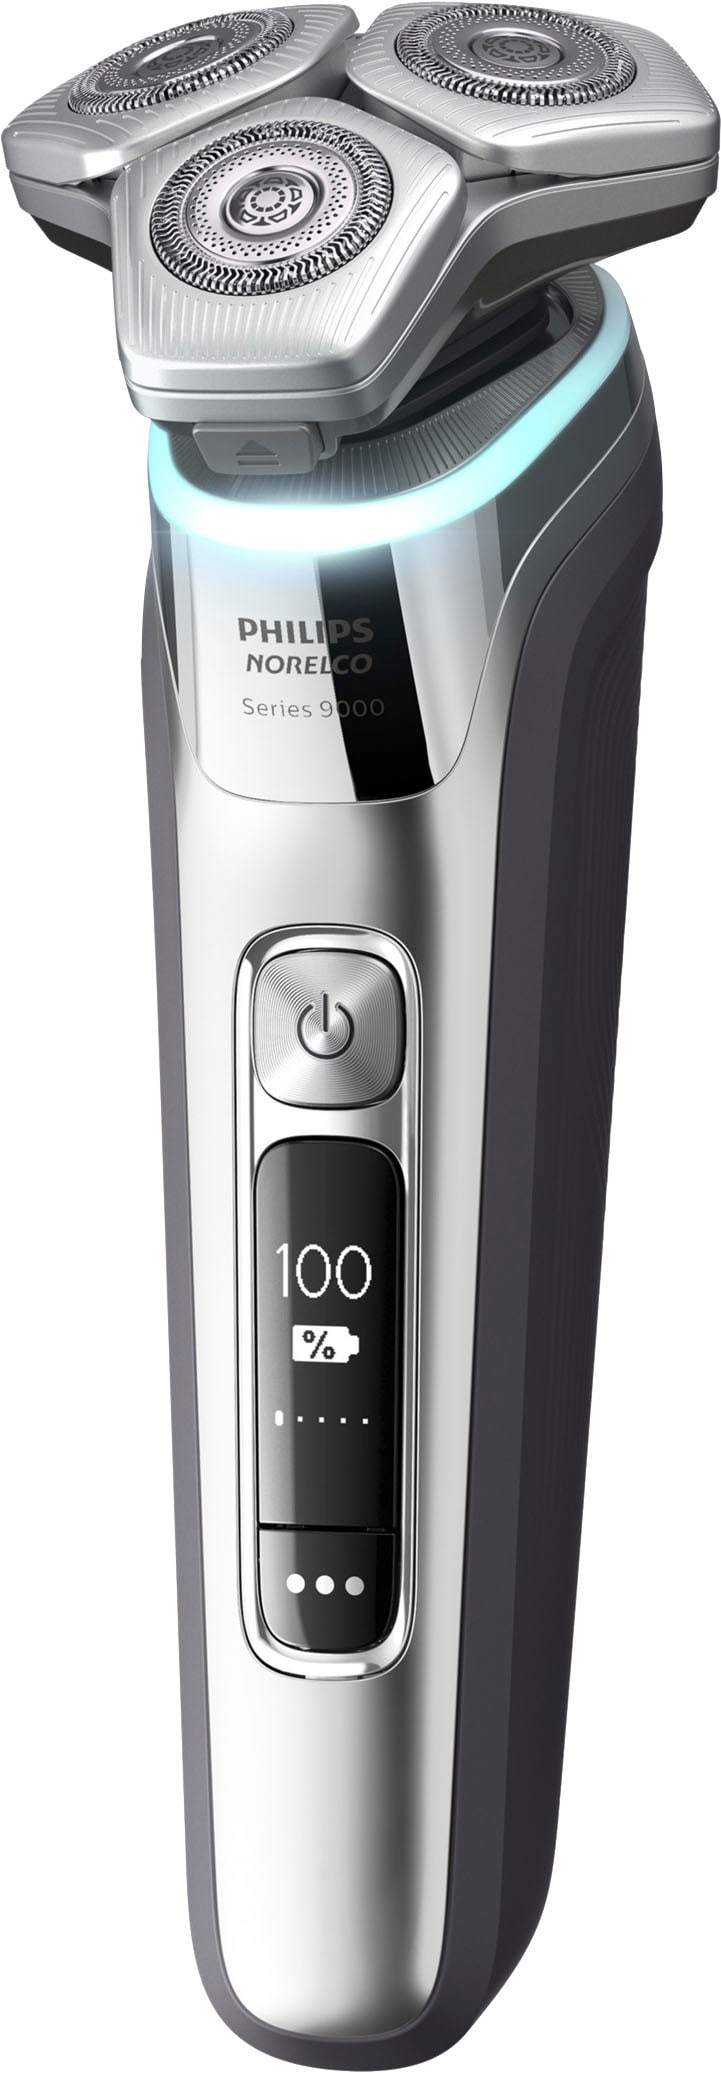 Philips Norelco - 9500 Rechargeable Wet/Dry Electric Shaver with Quick Clean, Travel Case, and Pop up Trimmer - Silver_1